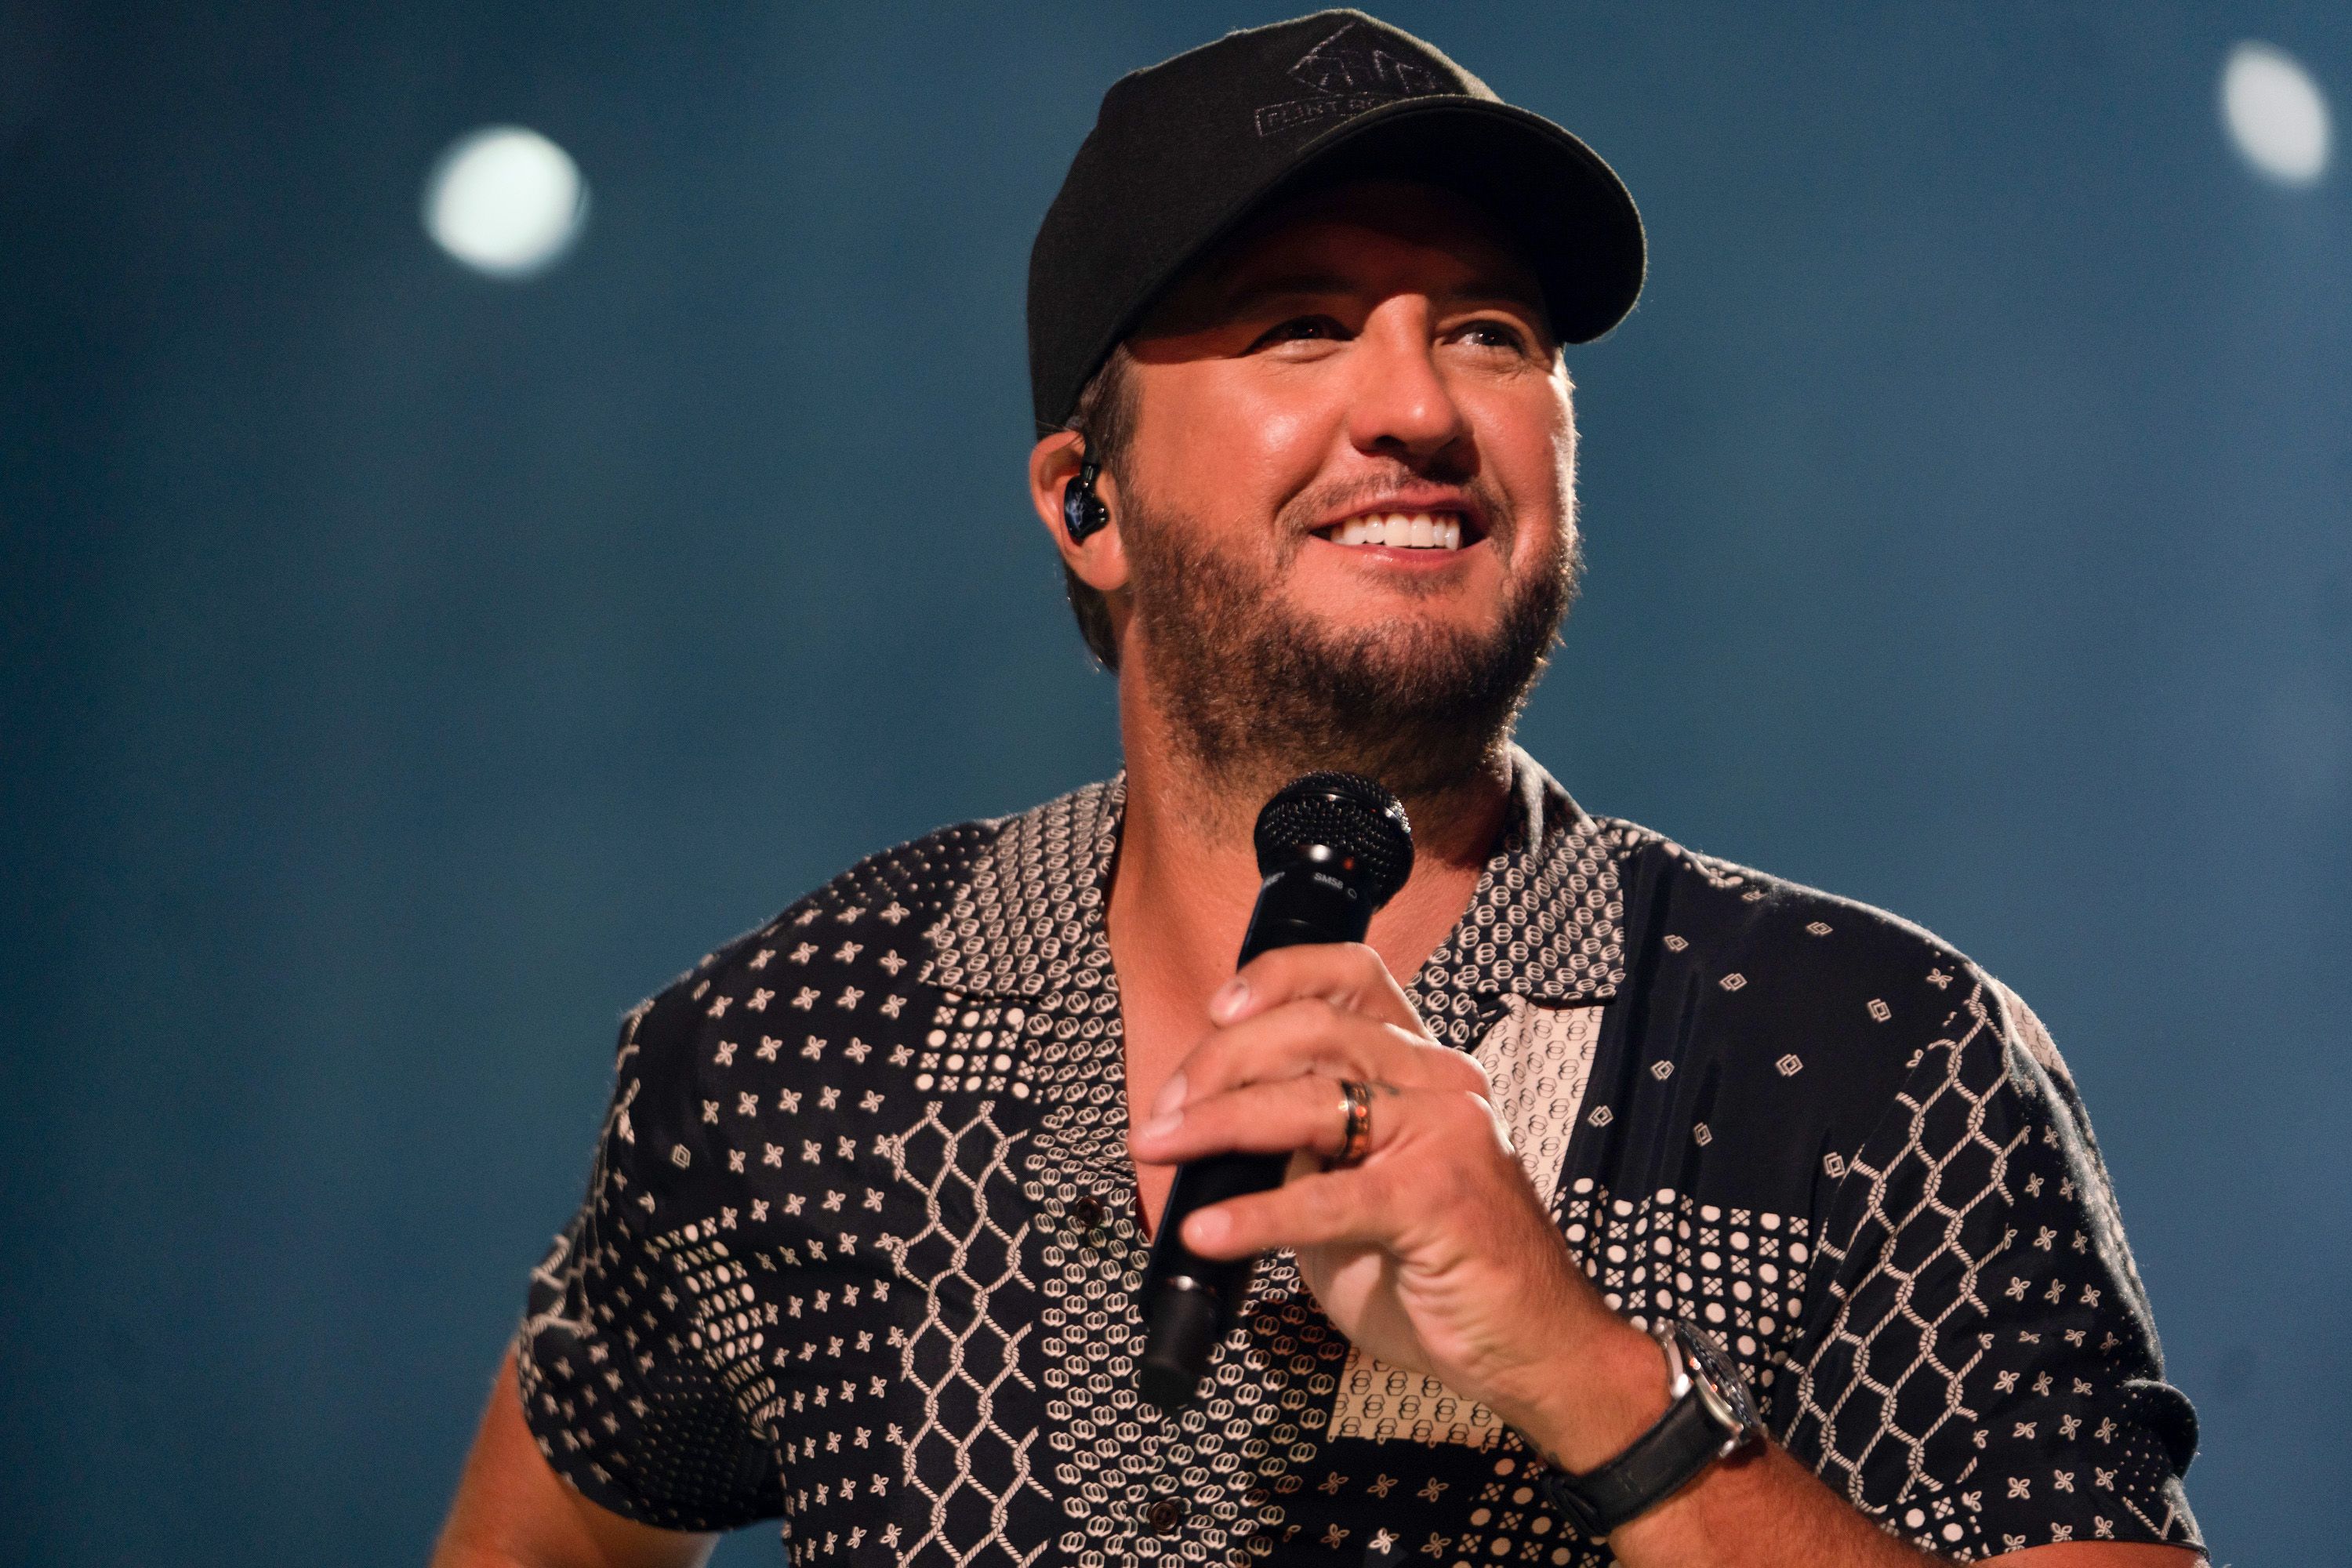 Free Sexy Luke Bryan Wallpaper  Other Cell Phone Items  Listiacom  Auctions for Free Stuff